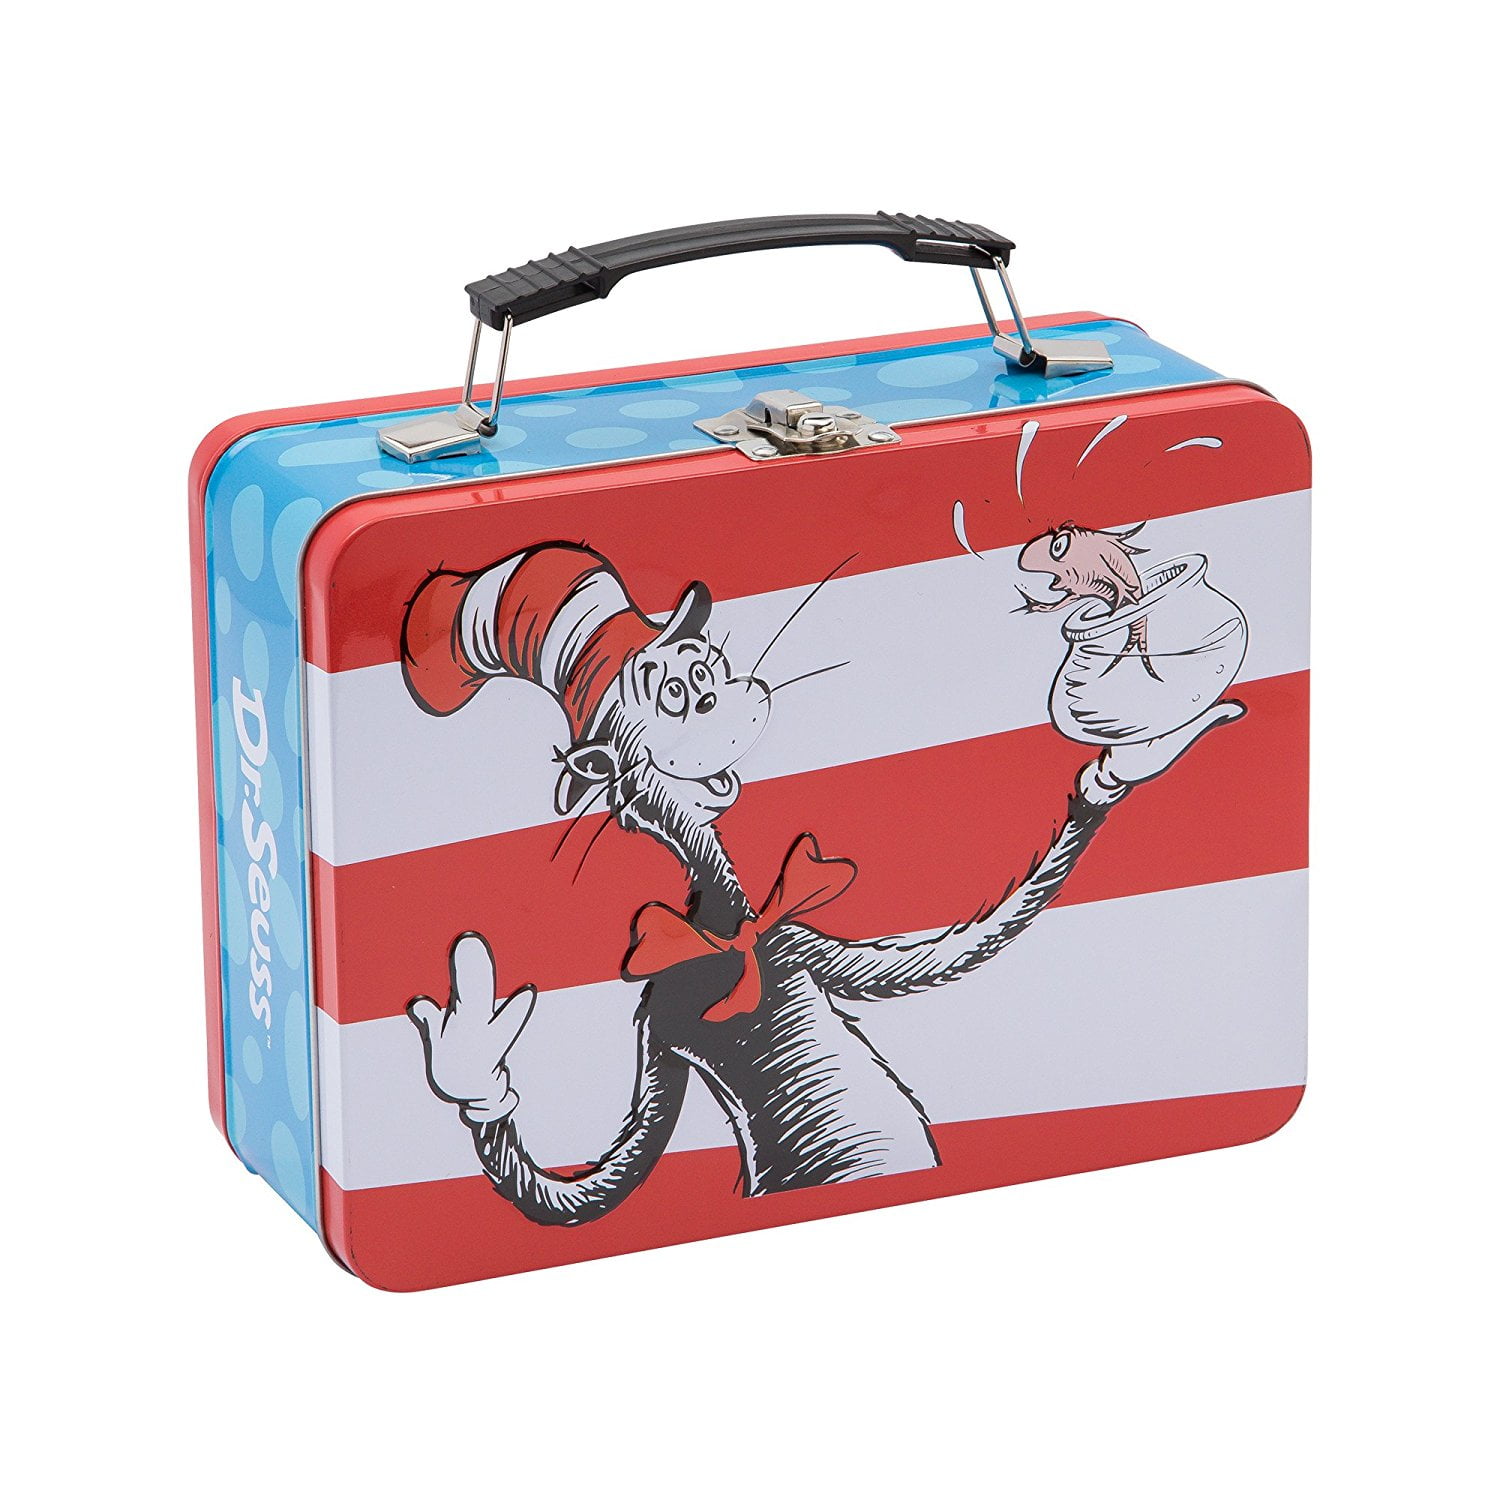 Seuss Cat in the Hat Large Tin Tote Kids Lunchbox School Container 17670 Dr